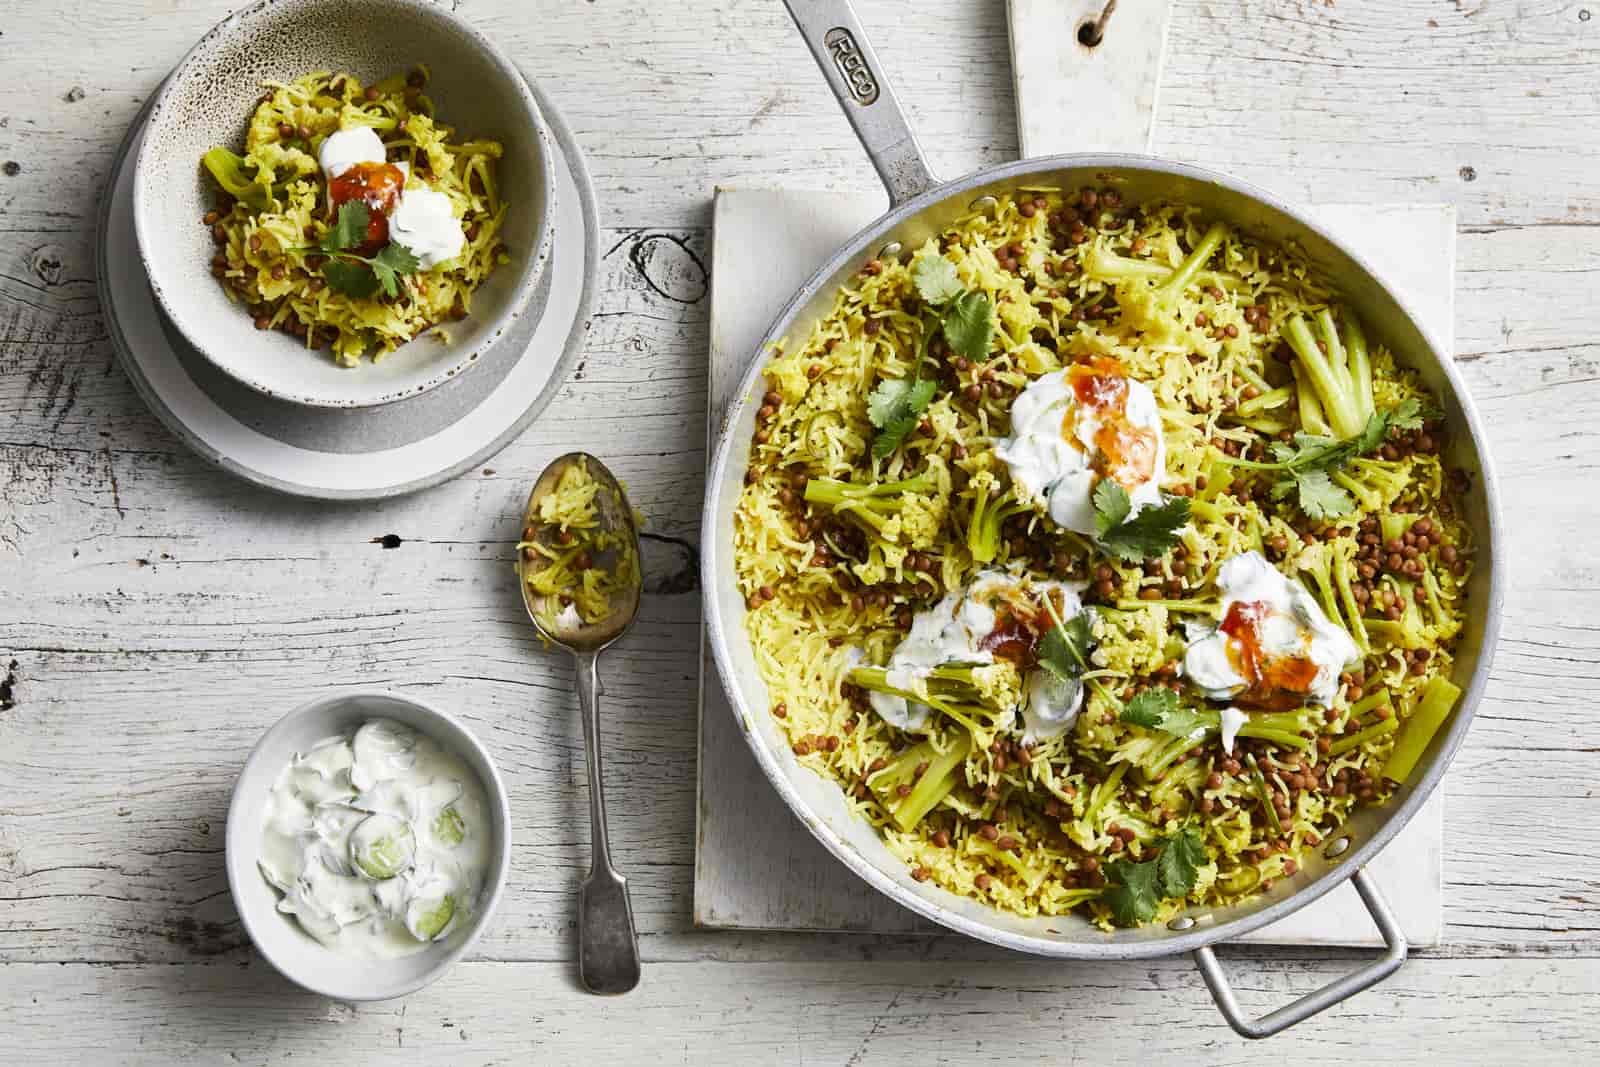 A dish of Indian Spiced Pilaf with Cauli-Blossom Fioretto added as a topping.